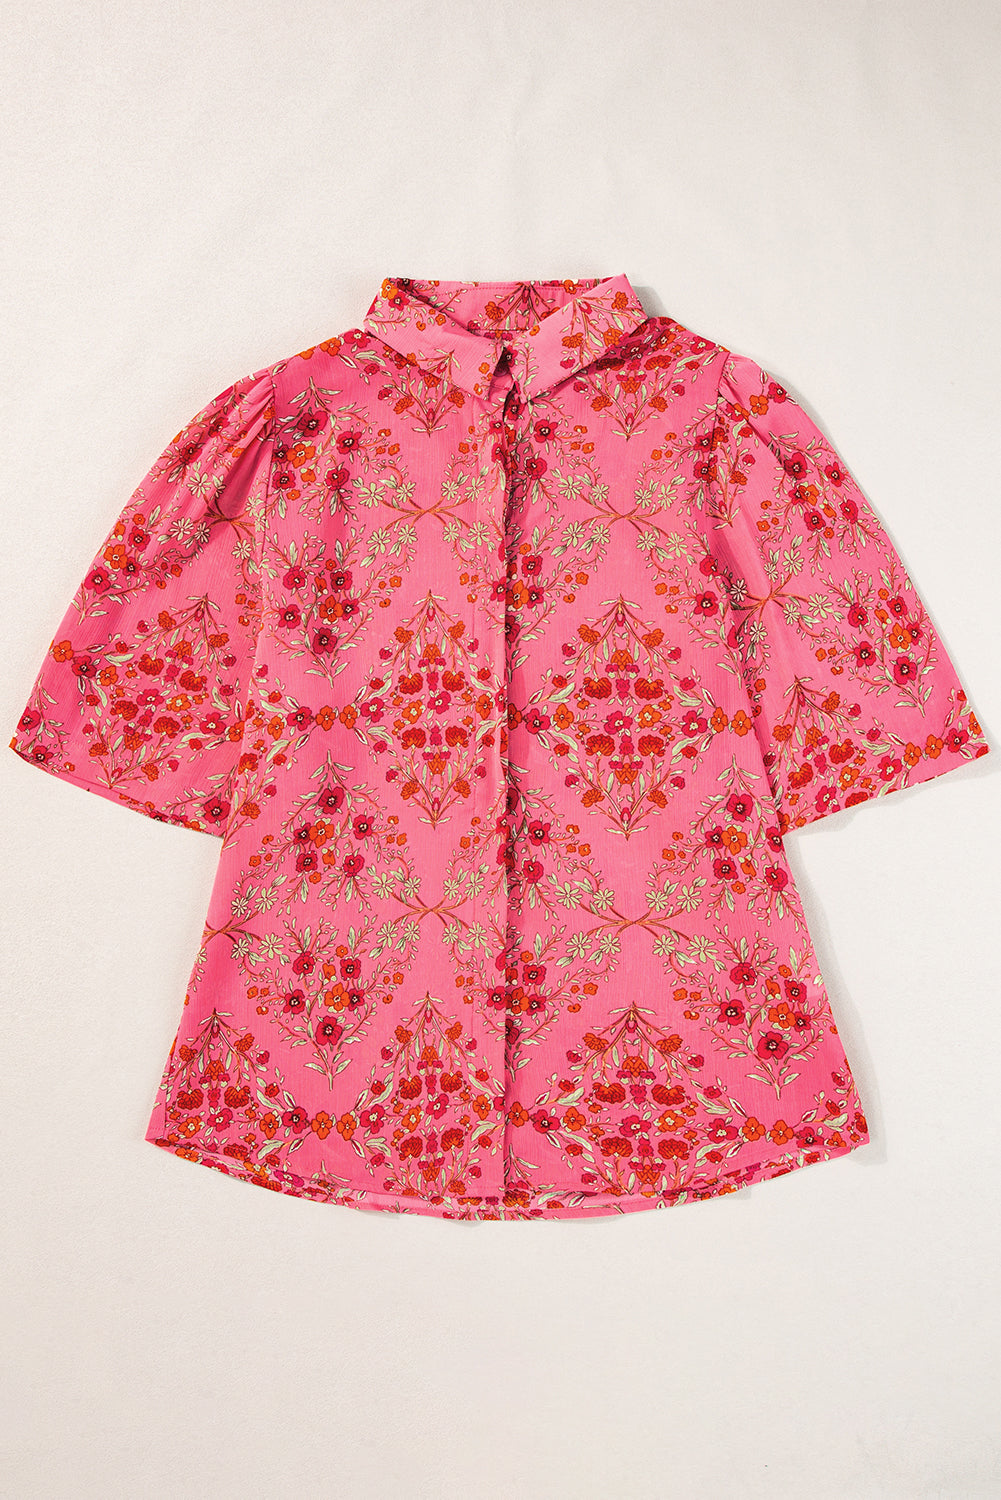 Rose Red Floral Print Wide Short Sleeve Loose Shirt-Tops/Blouses & Shirts-[Adult]-[Female]-2022 Online Blue Zone Planet